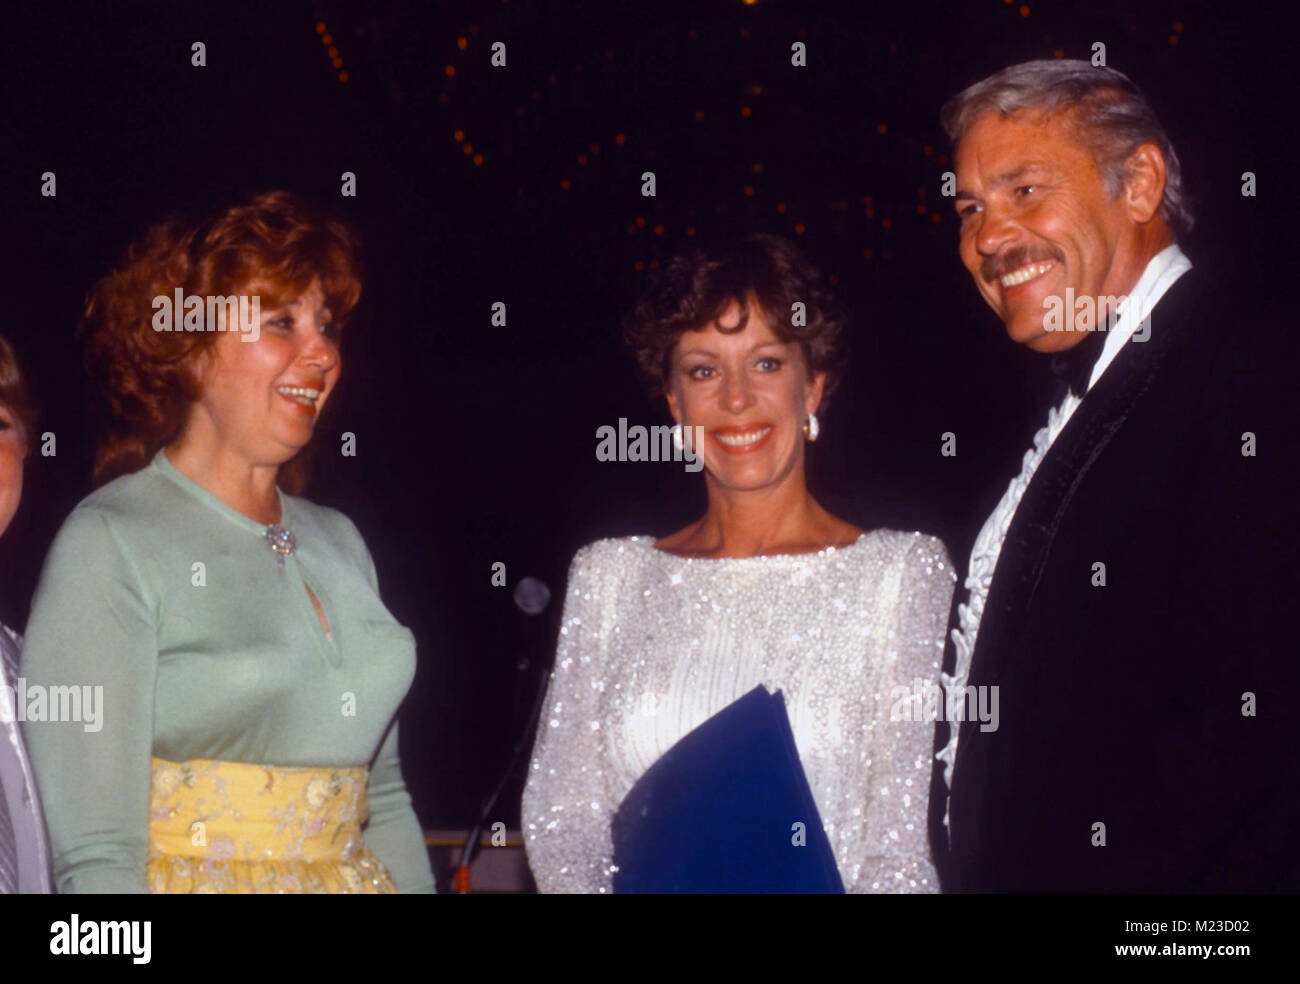 LOS ANGELES, CA - MAY 9: Opera singer Beverly Sills and Comedian/actress Carol Burnett attend event honoring her on May 9, 1981 at the Century Plaza Hotel in Los Angeles, California. Photo by Barry King/Alamy Stock Photo Stock Photo